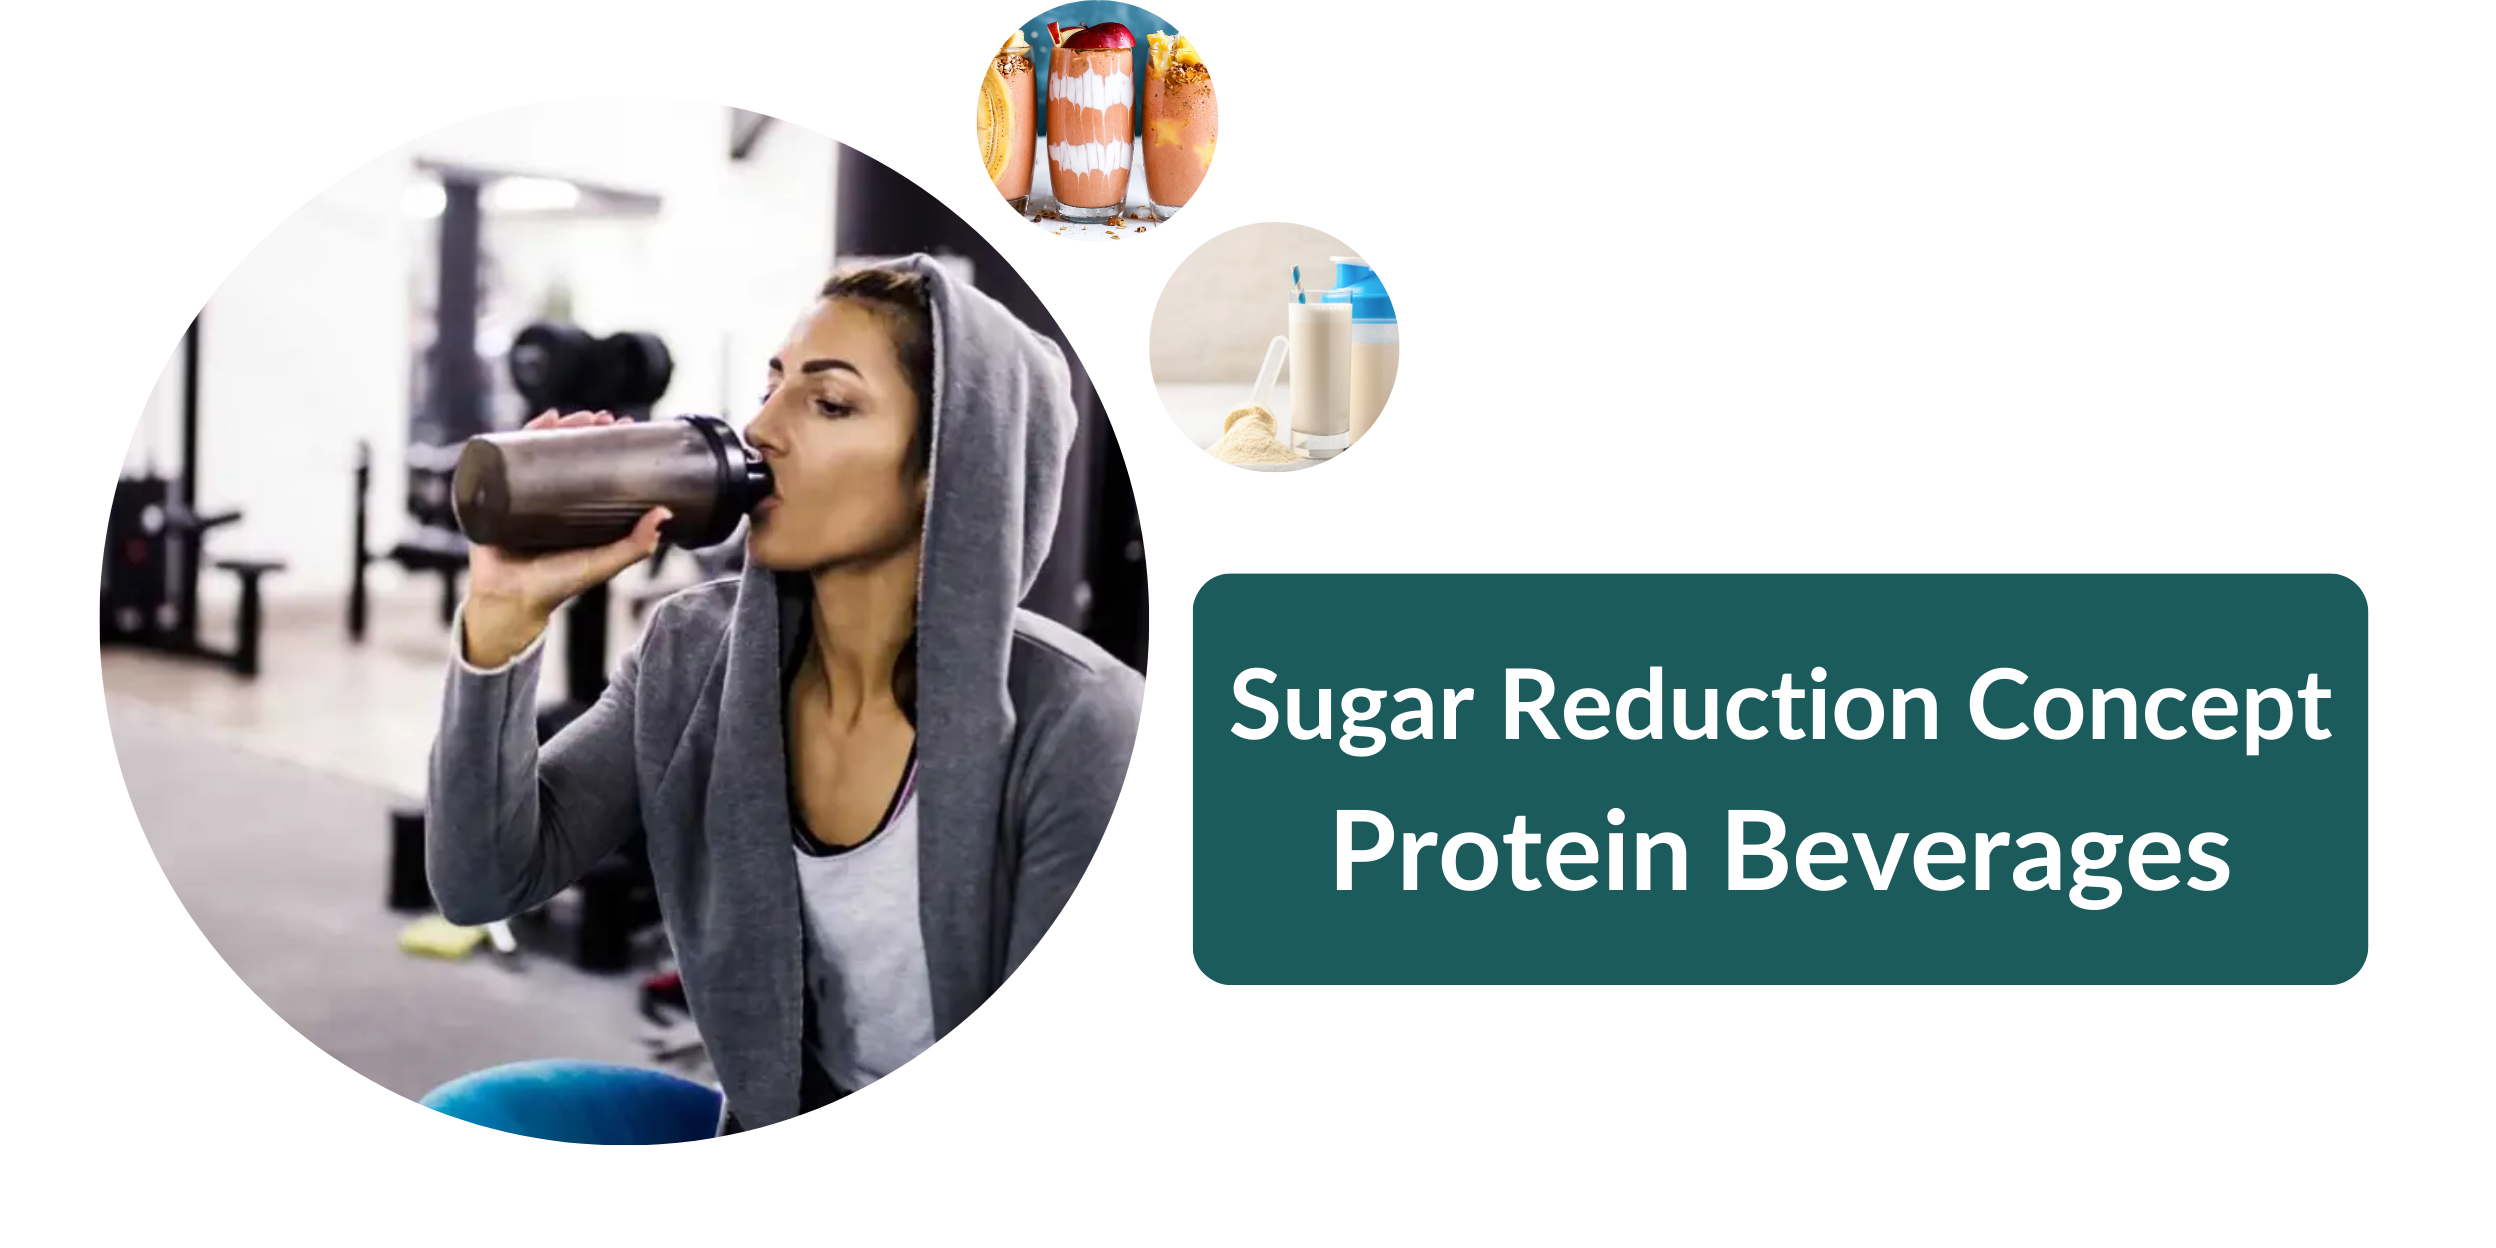 Sugar Reduction Concept Protein Beverages